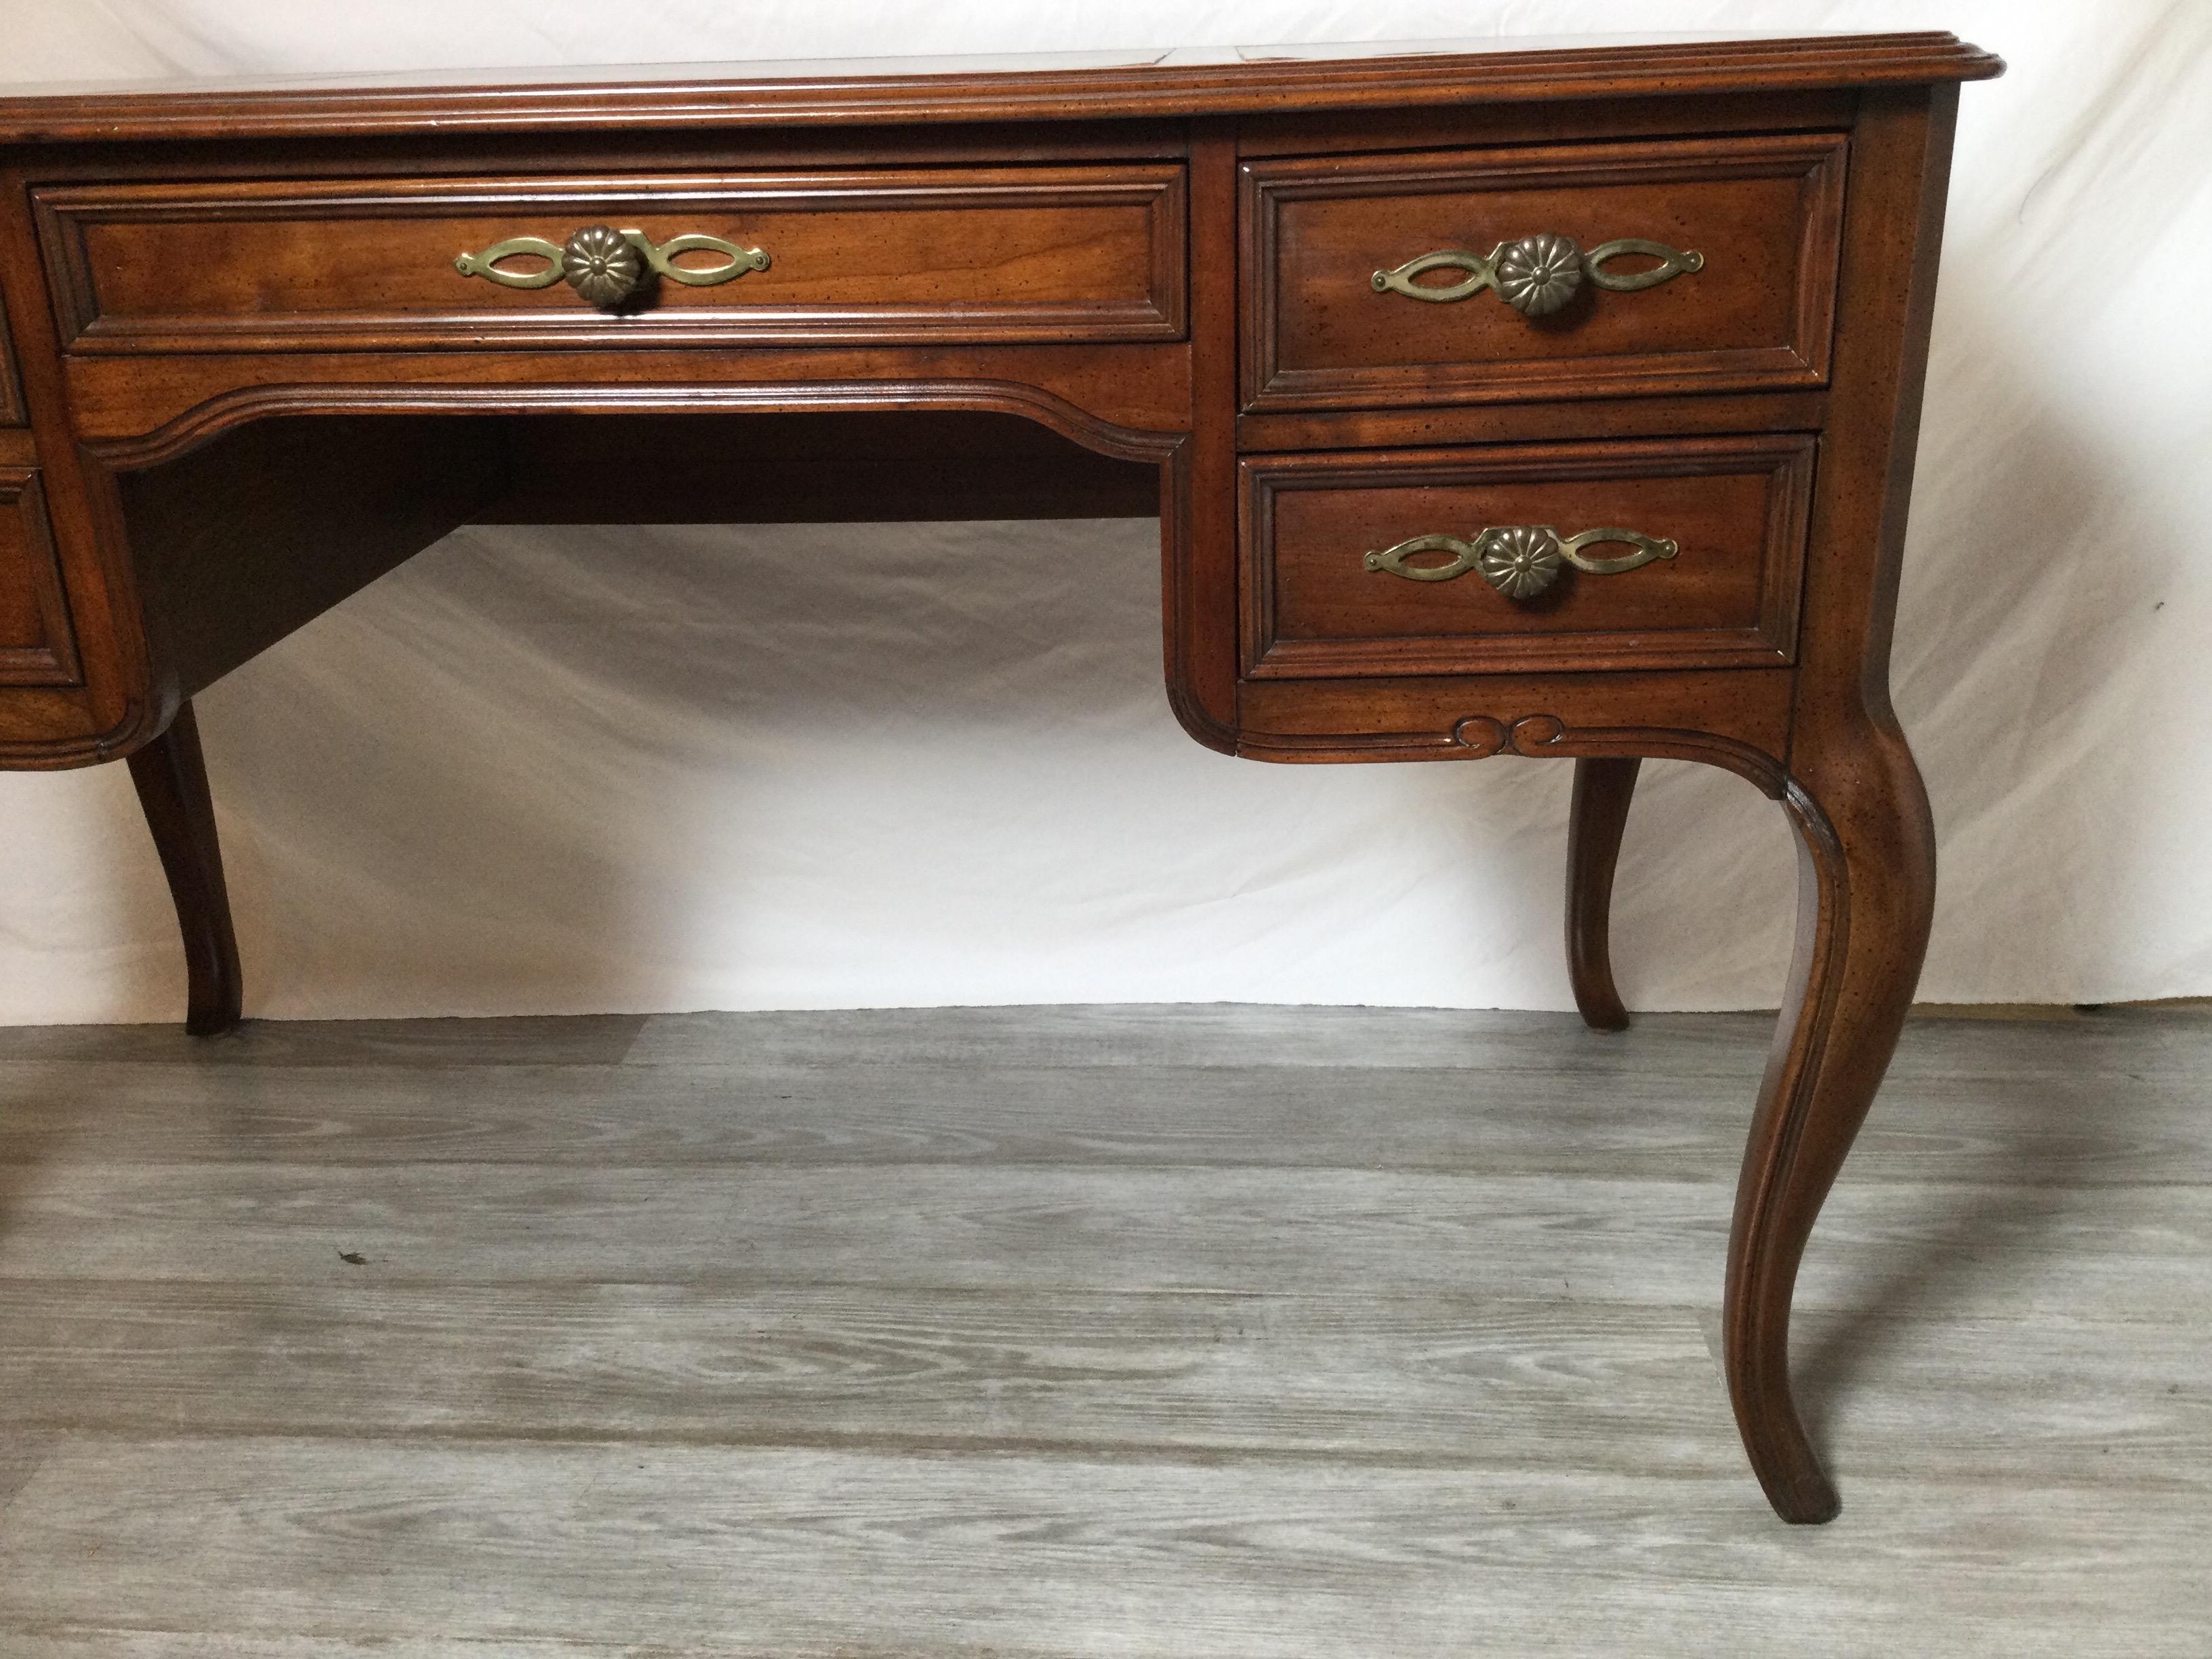 Circa 1960's Mid-Century Leather Top Walnut Desk by Sligh Furniture Co. Chicago For Sale 3